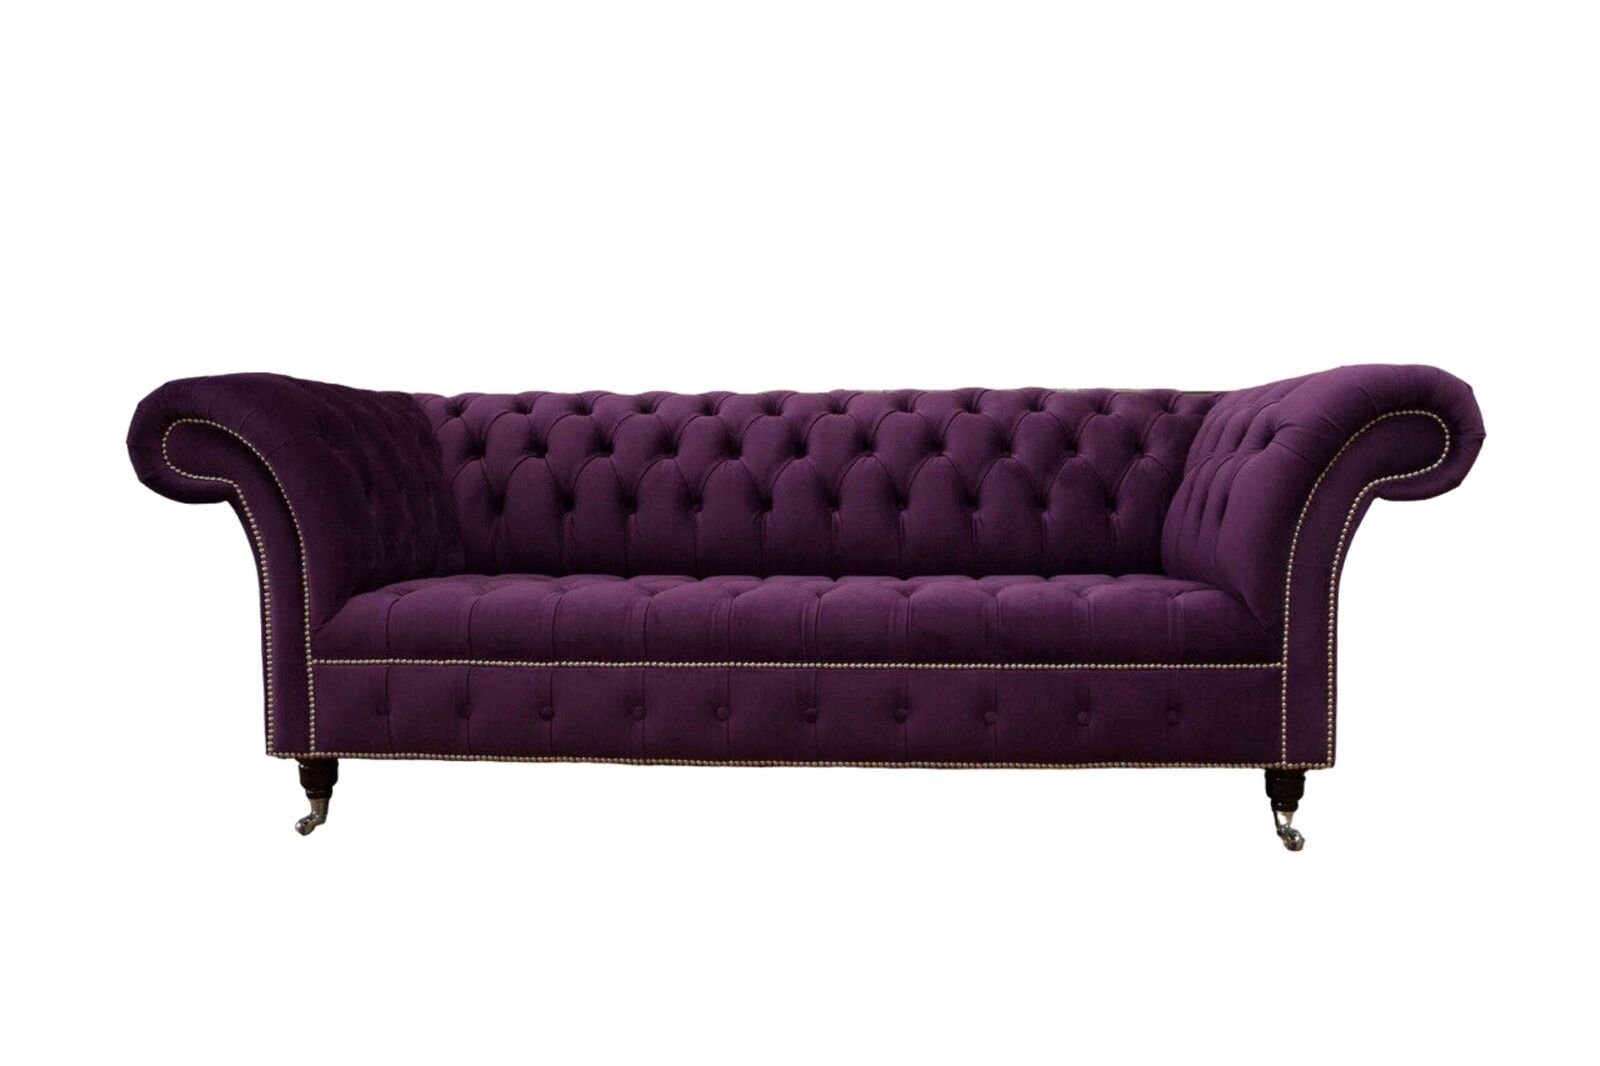 Sofa Textil, In Couch Made 3 Lila Chesterfield Sitzer Designer JVmoebel Sofa Europe Chesterfield